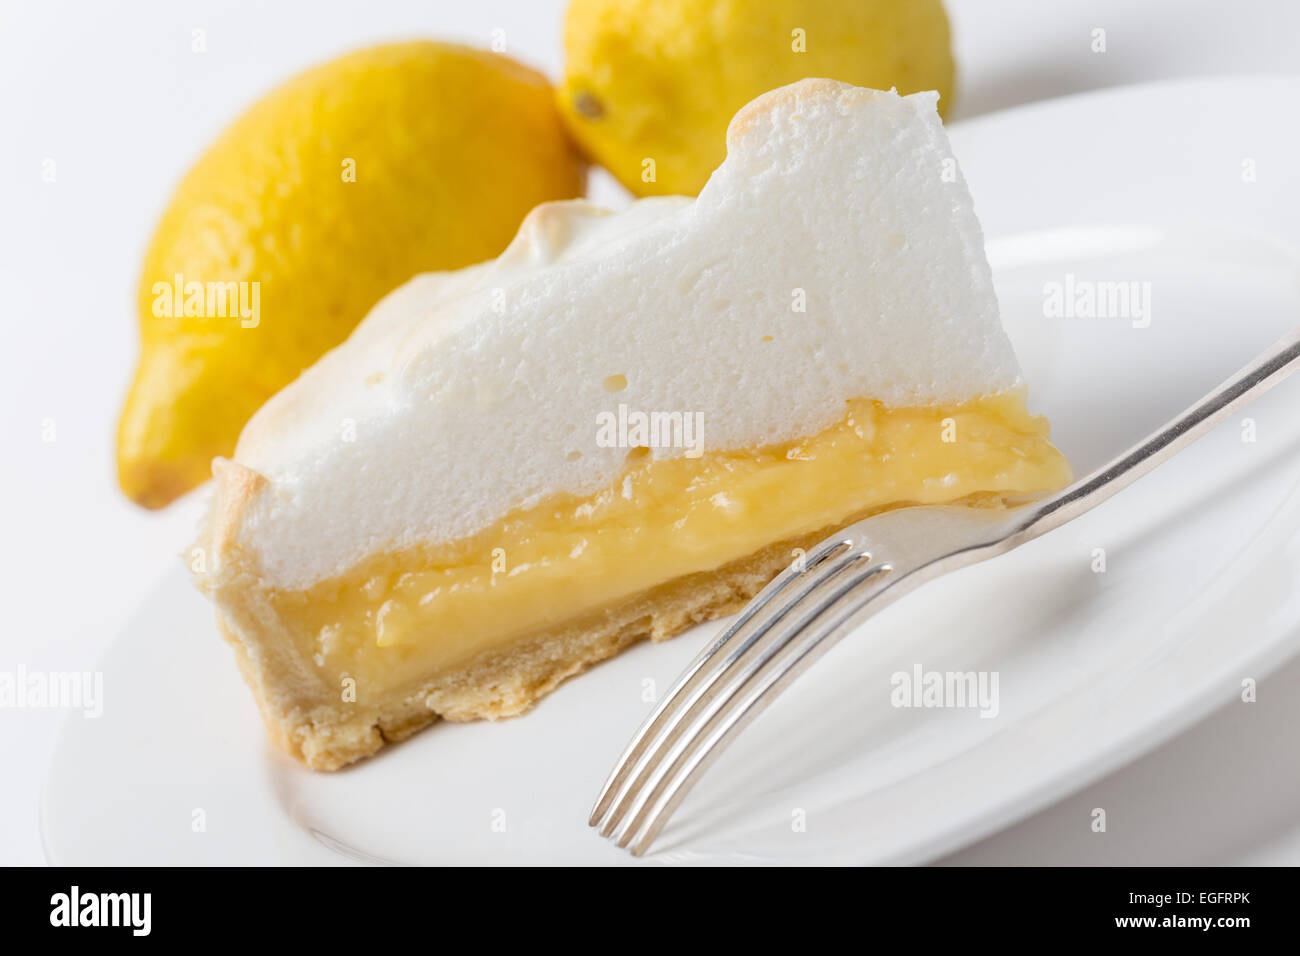 Homemade lemon meringue pie, a classic of European dessert cuisine, with lemons and a fork, shot at an angle Stock Photo